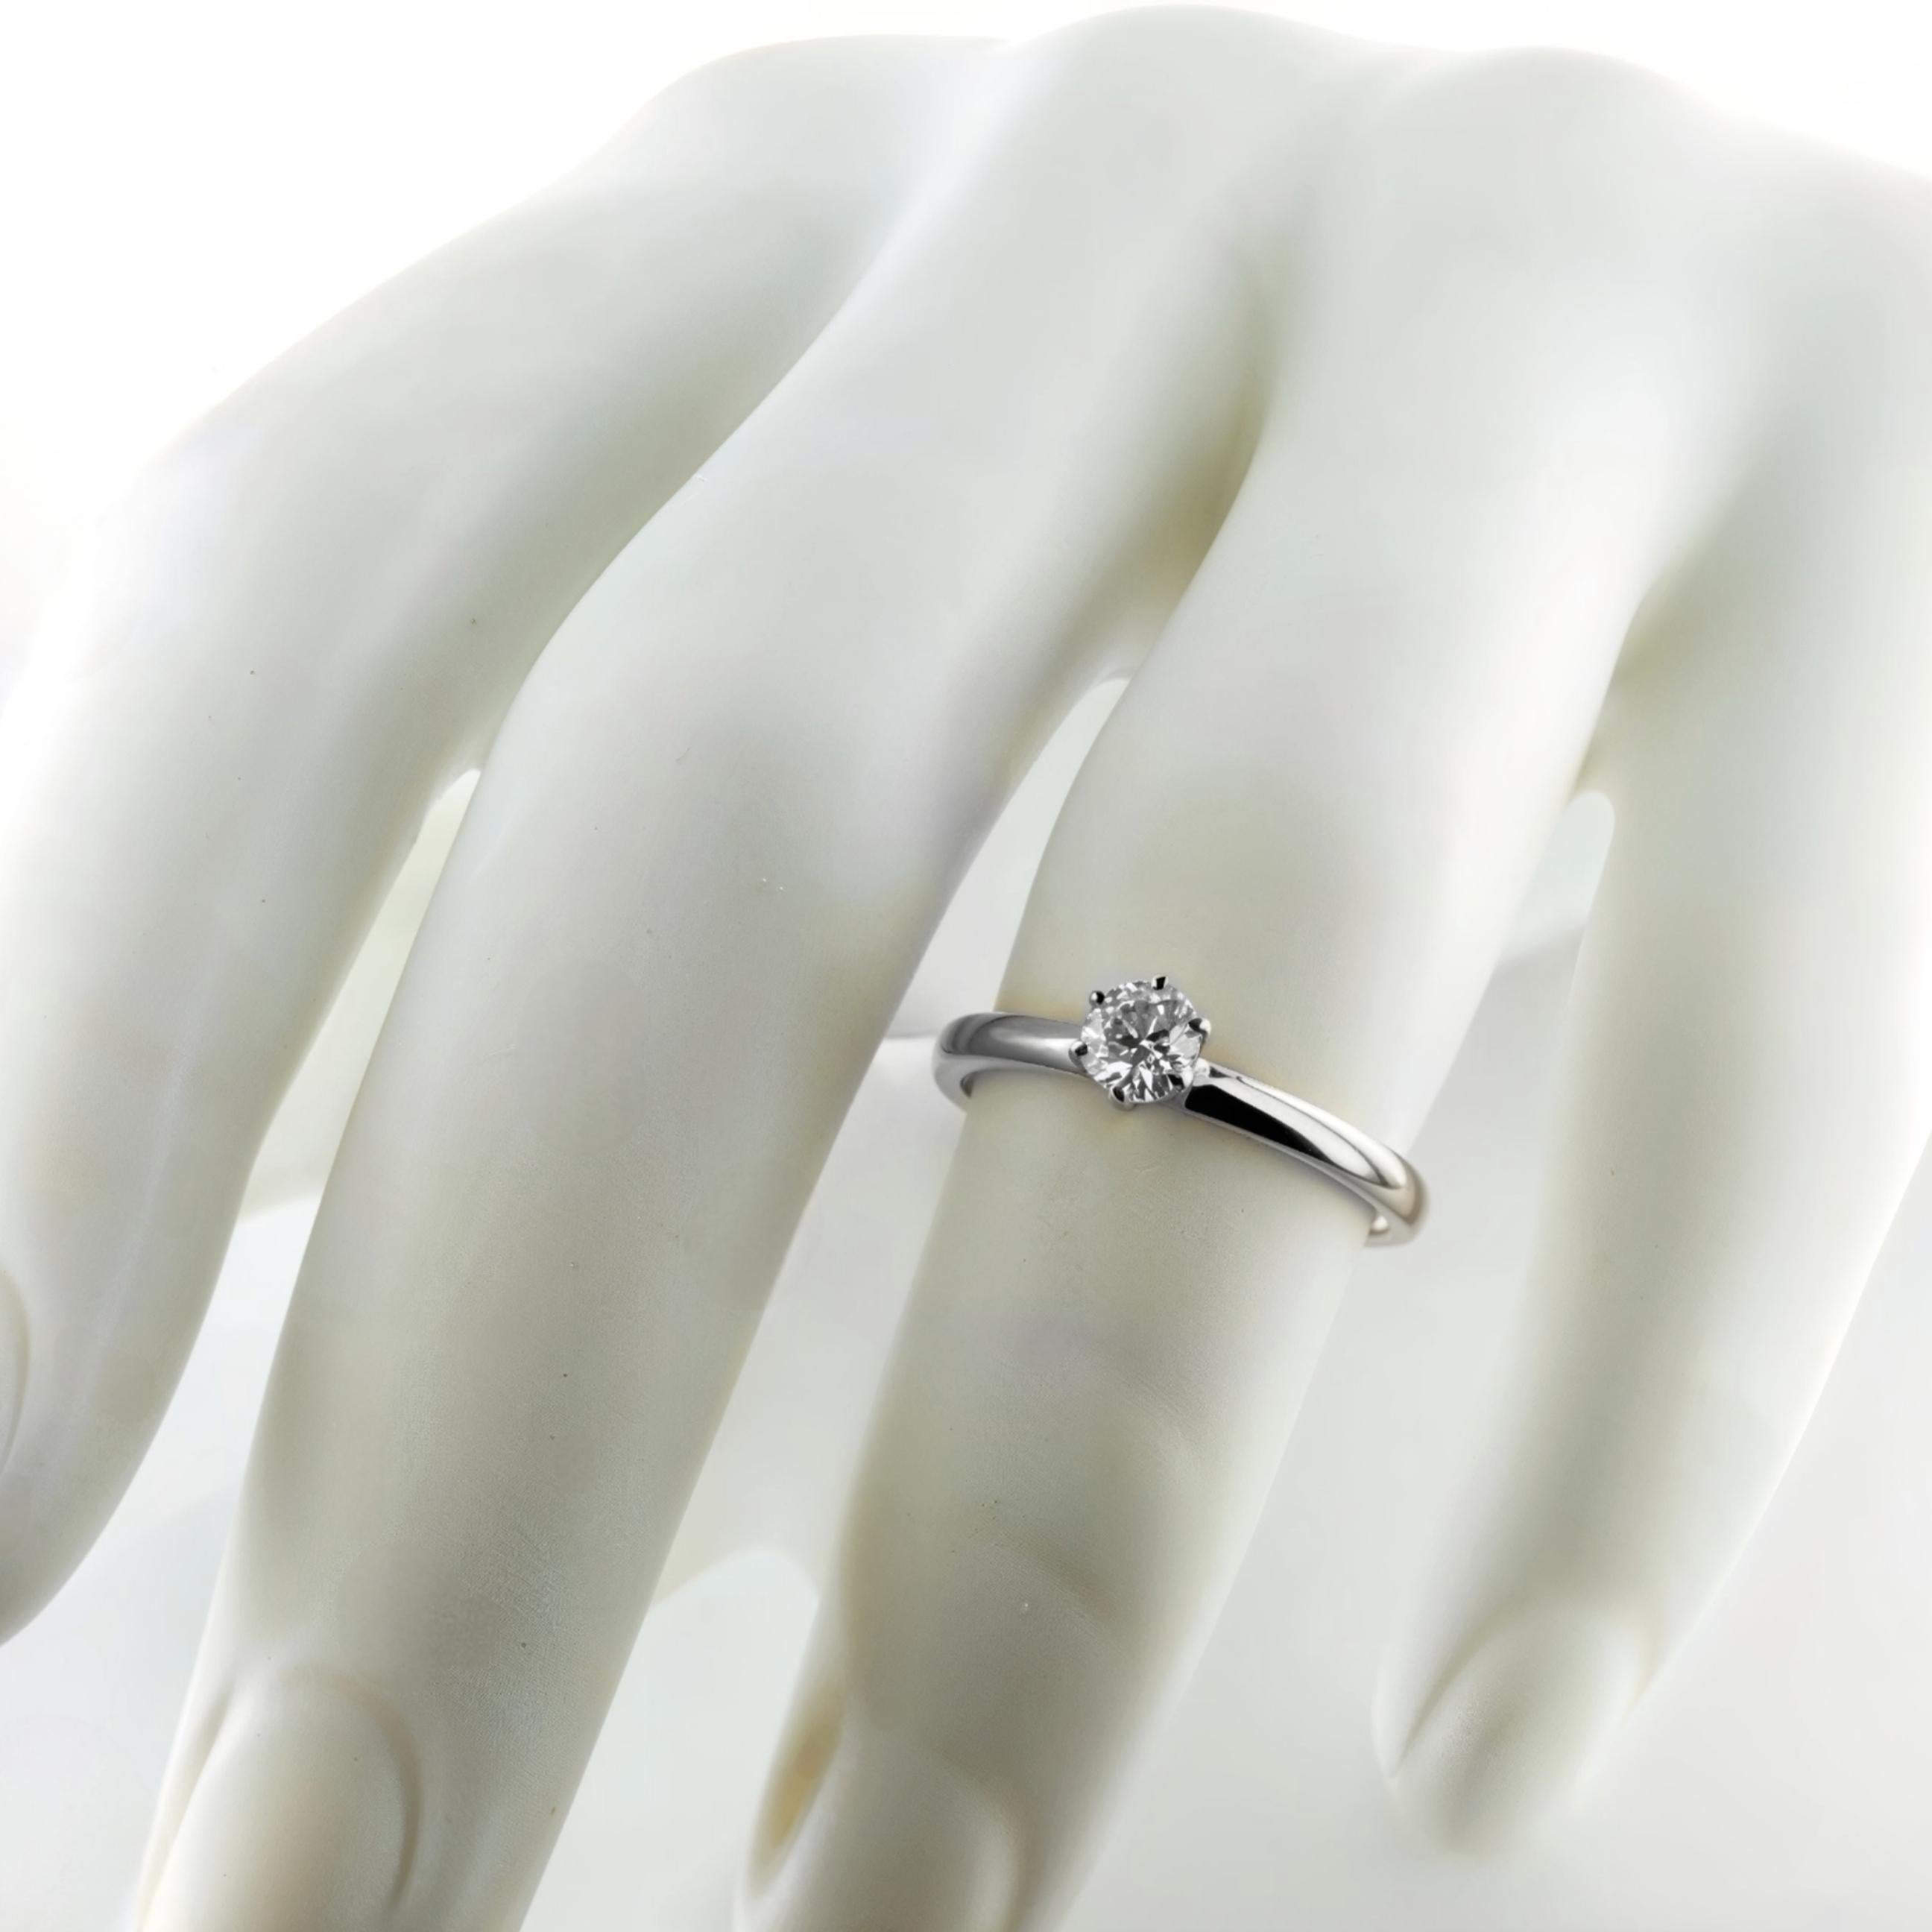 For Sale:  Stunning Classic 0.25 Carat Diamond Solitaire Ring in 14K Gold 13